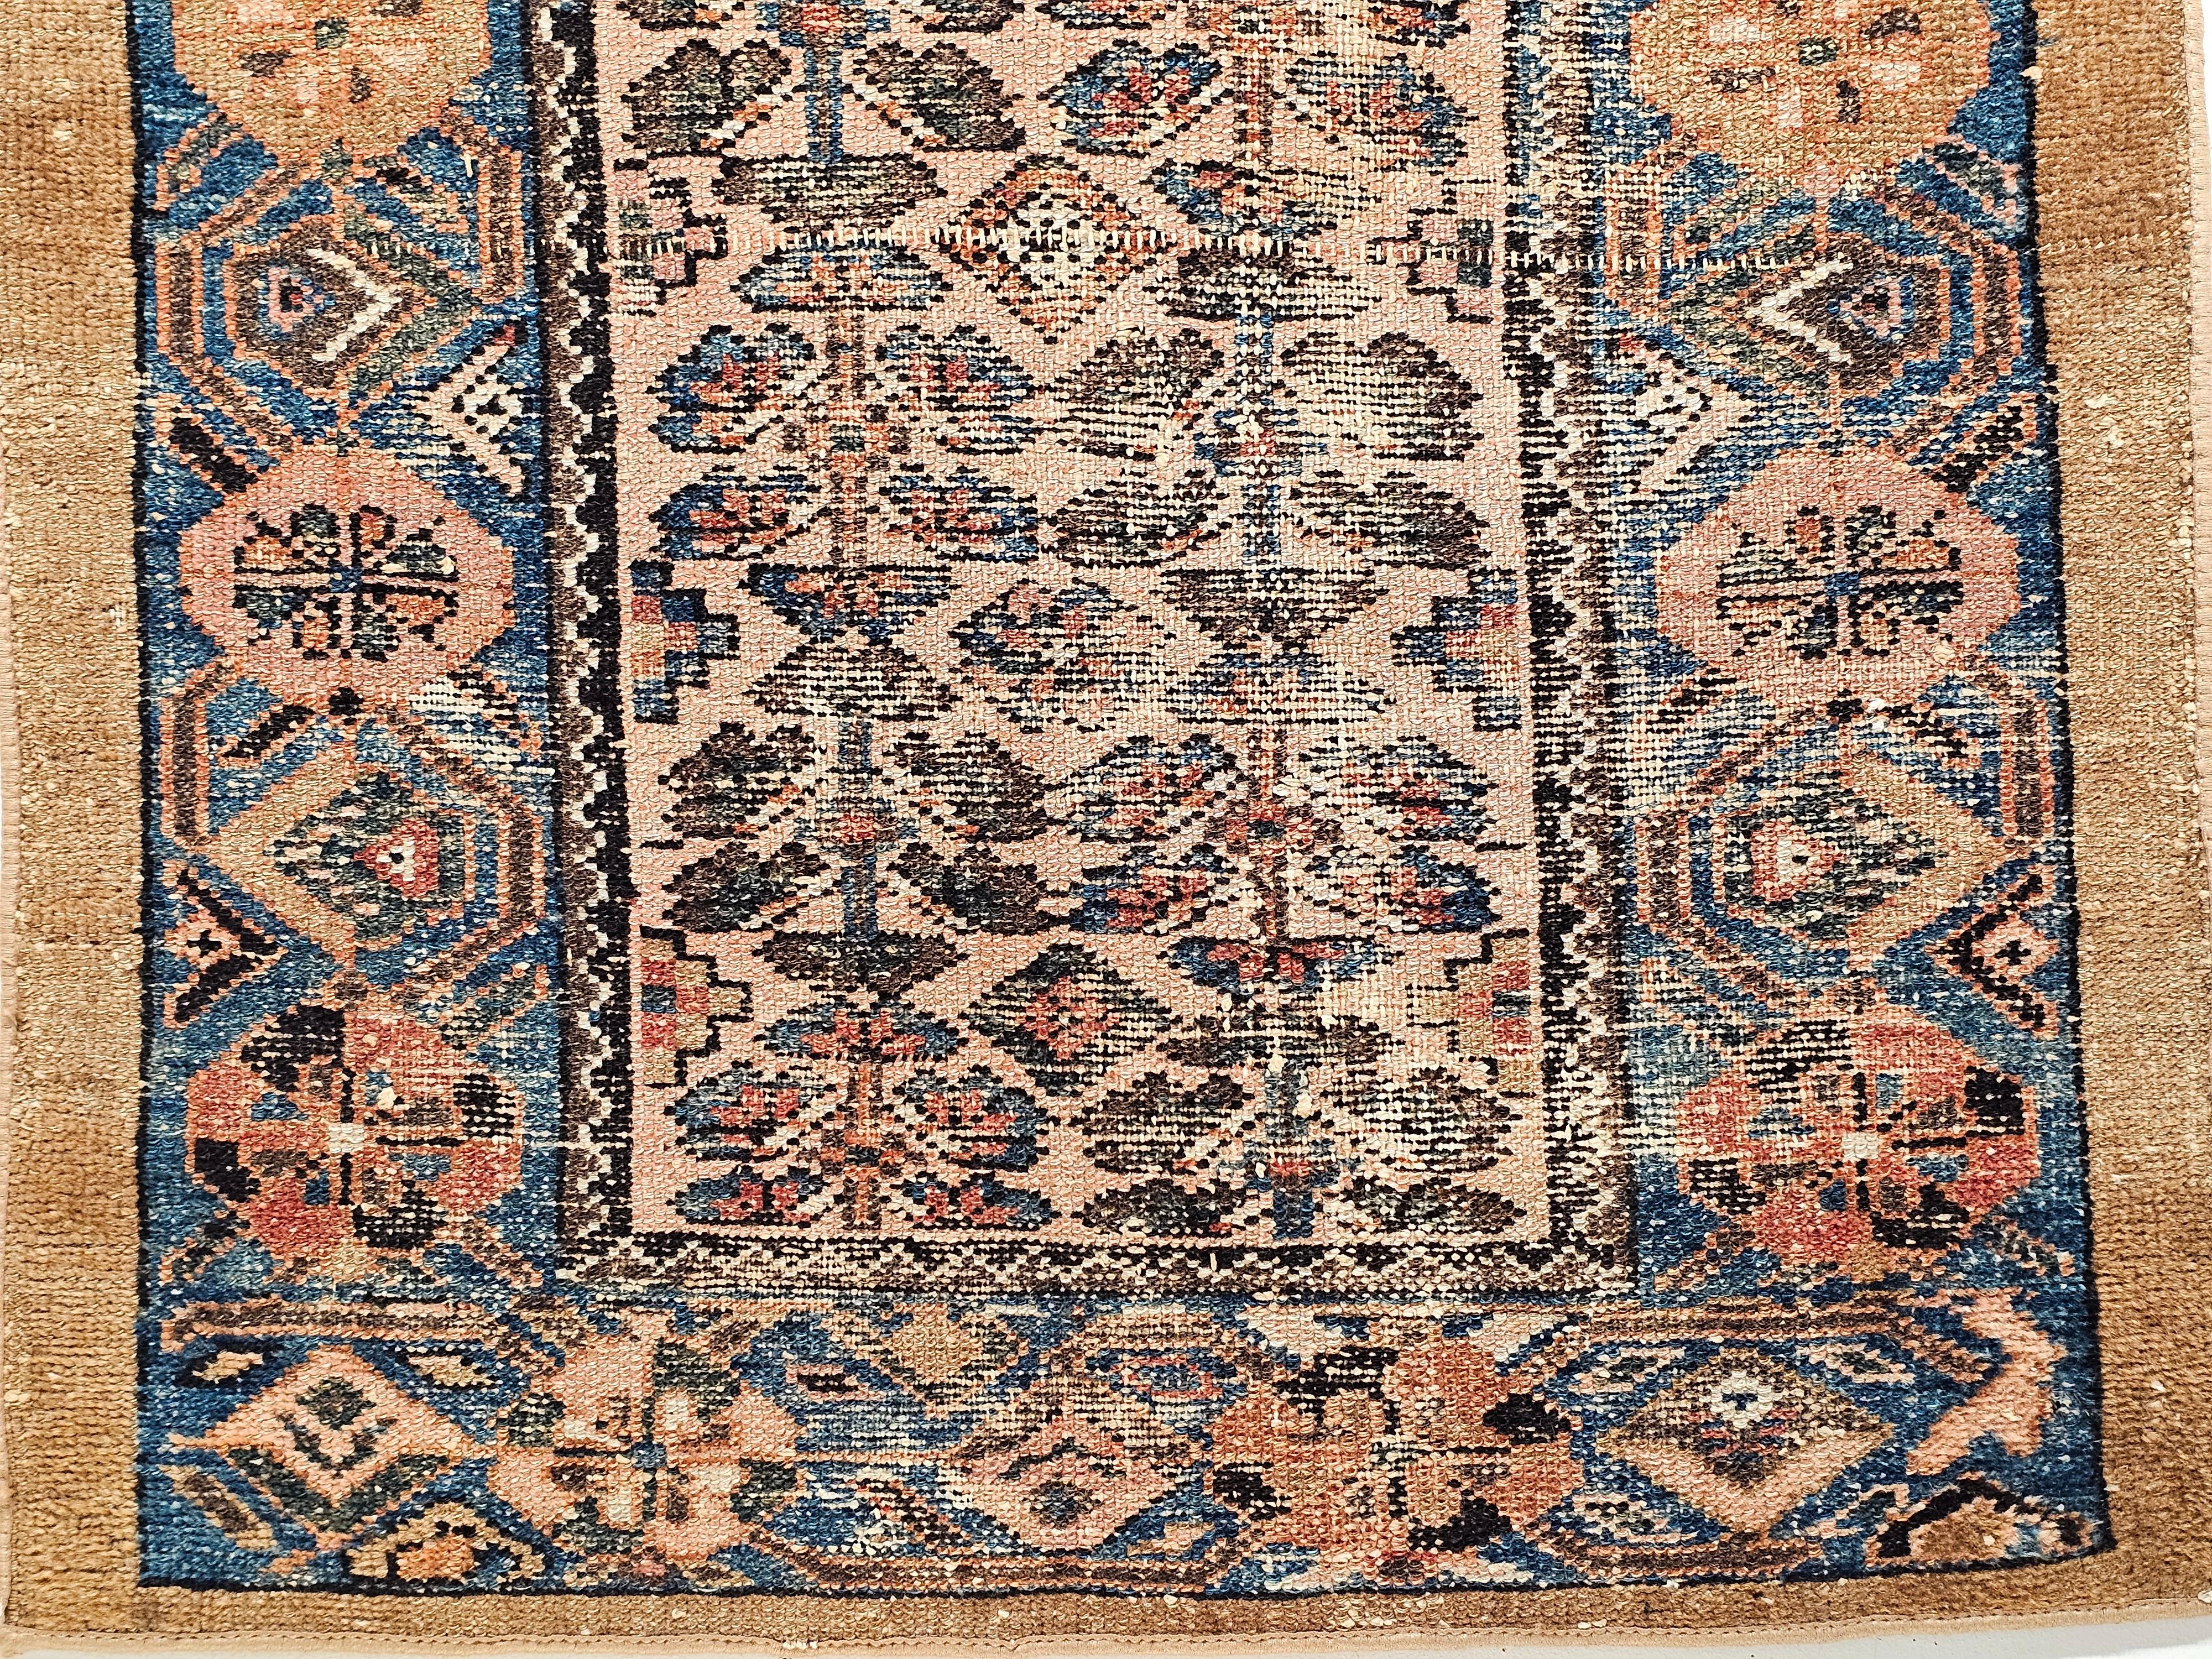 Vintage Persian Camelhair Malayer Area Rug in Allover Pattern with French Blue In Good Condition For Sale In Barrington, IL